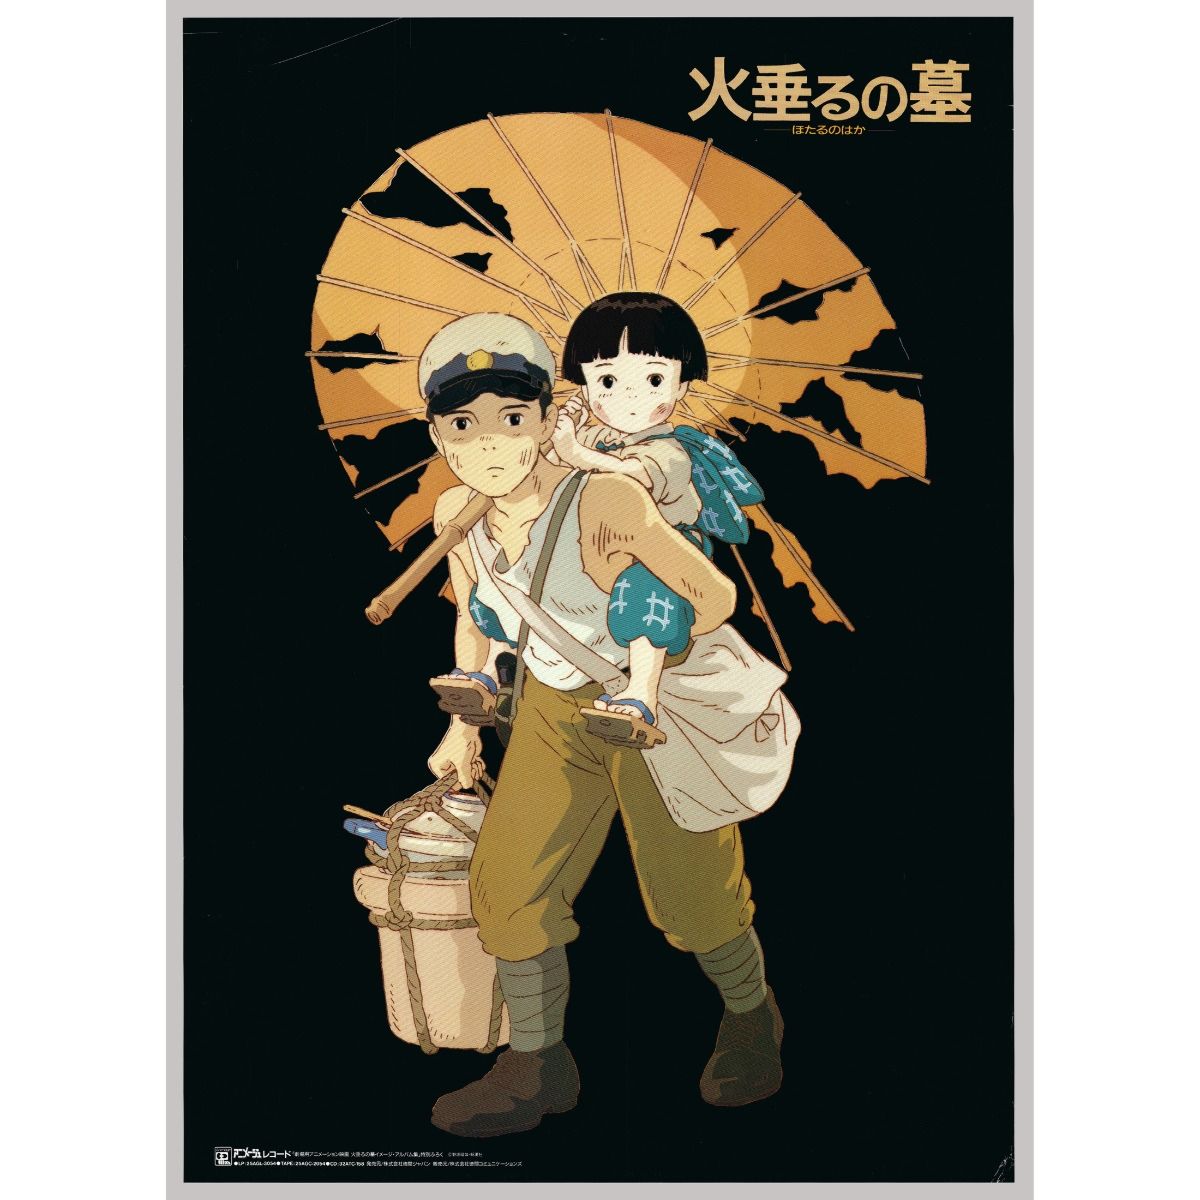 Grave Of The Fireflies Poster